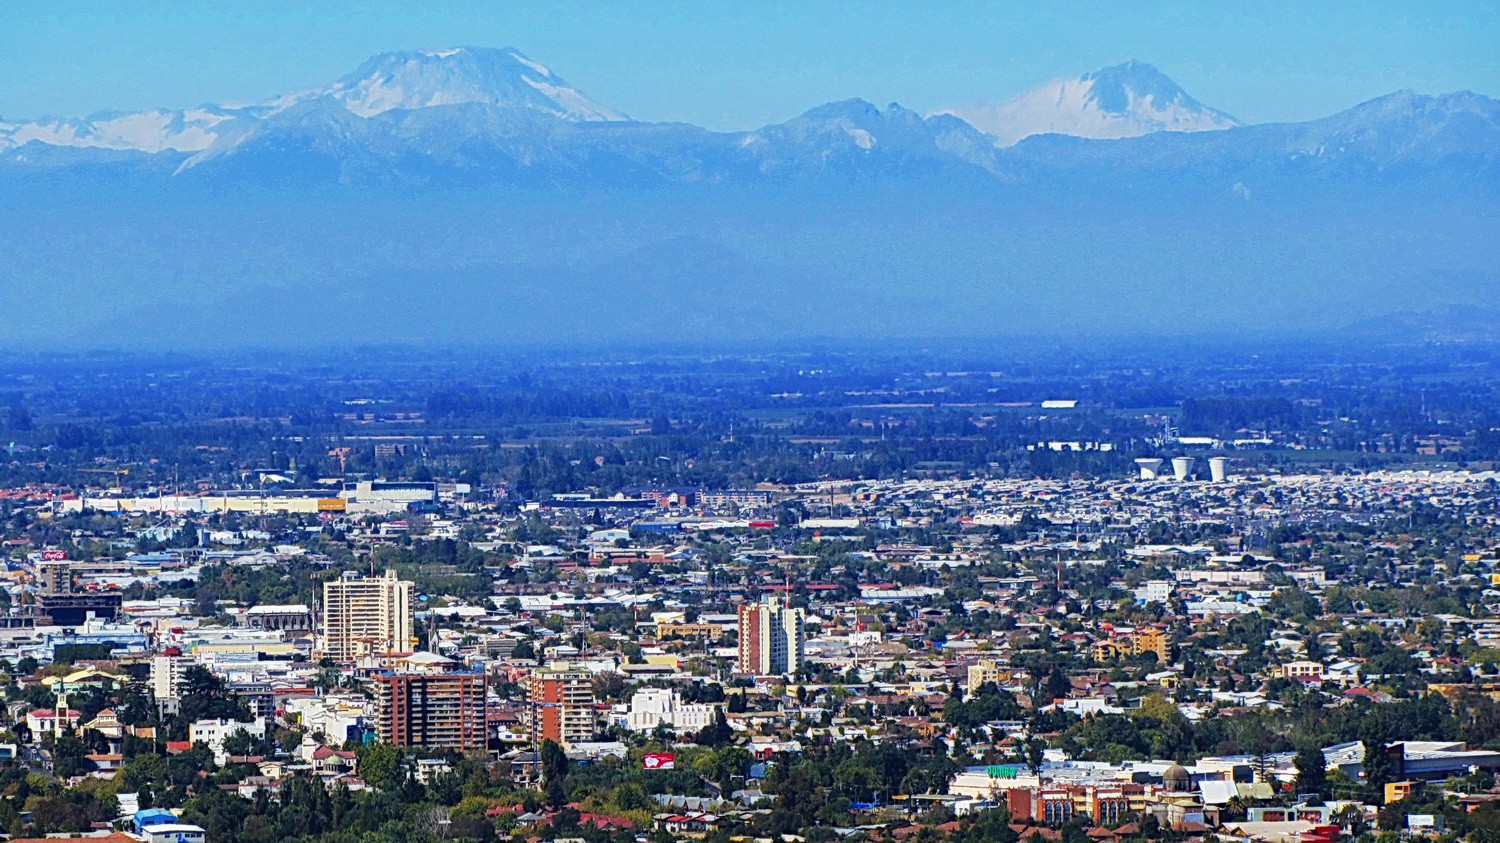 Talca with Volcan Descabadezo in the background